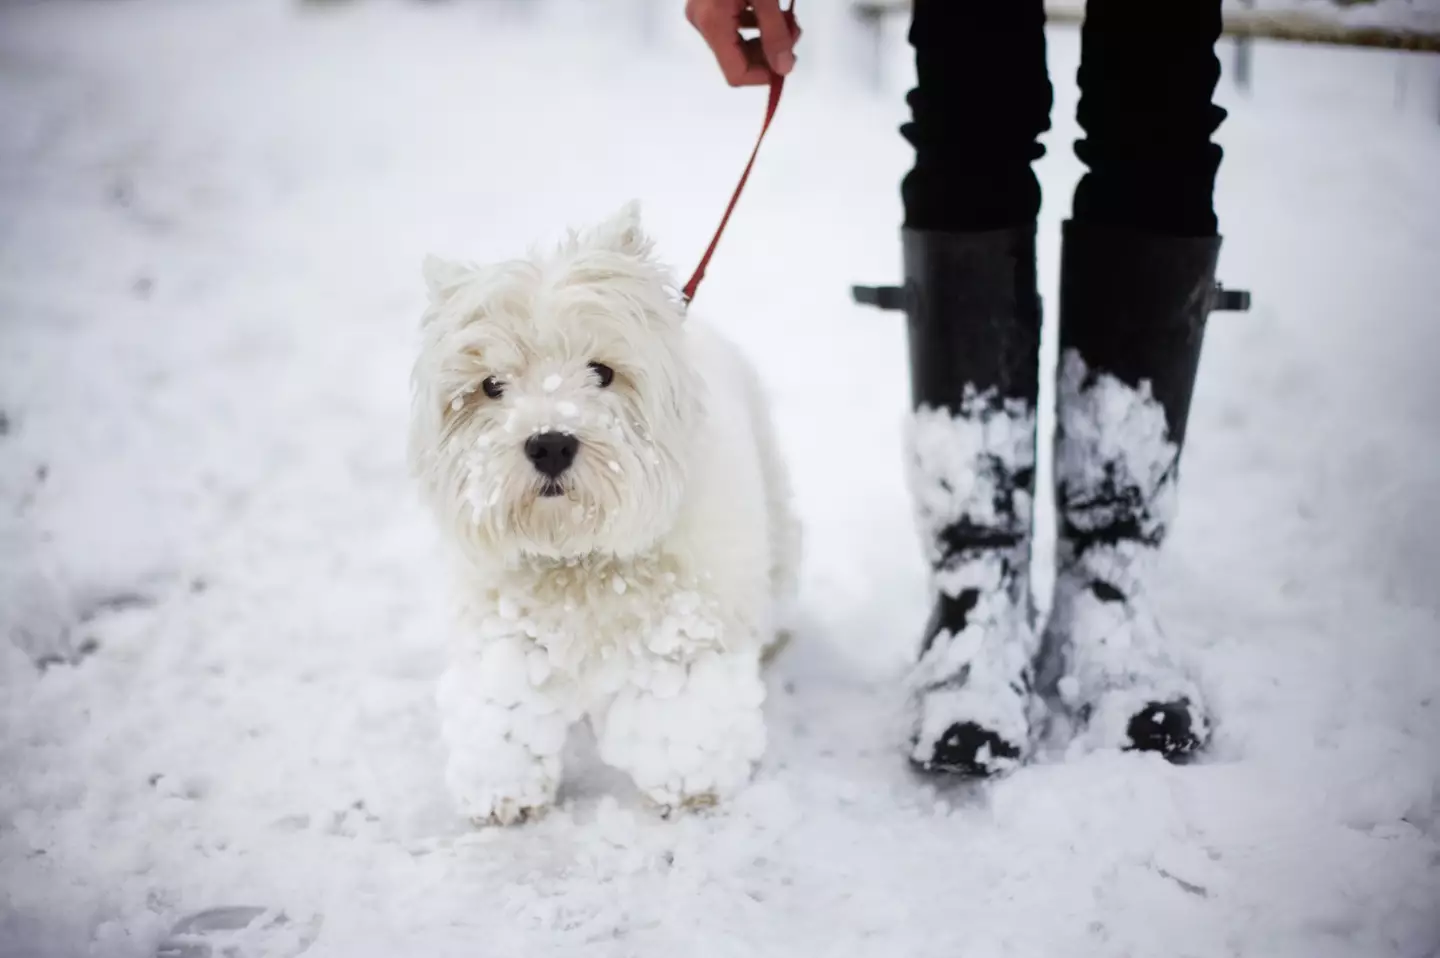 Pet owners have been issued a warning about the risks of walking on grit.